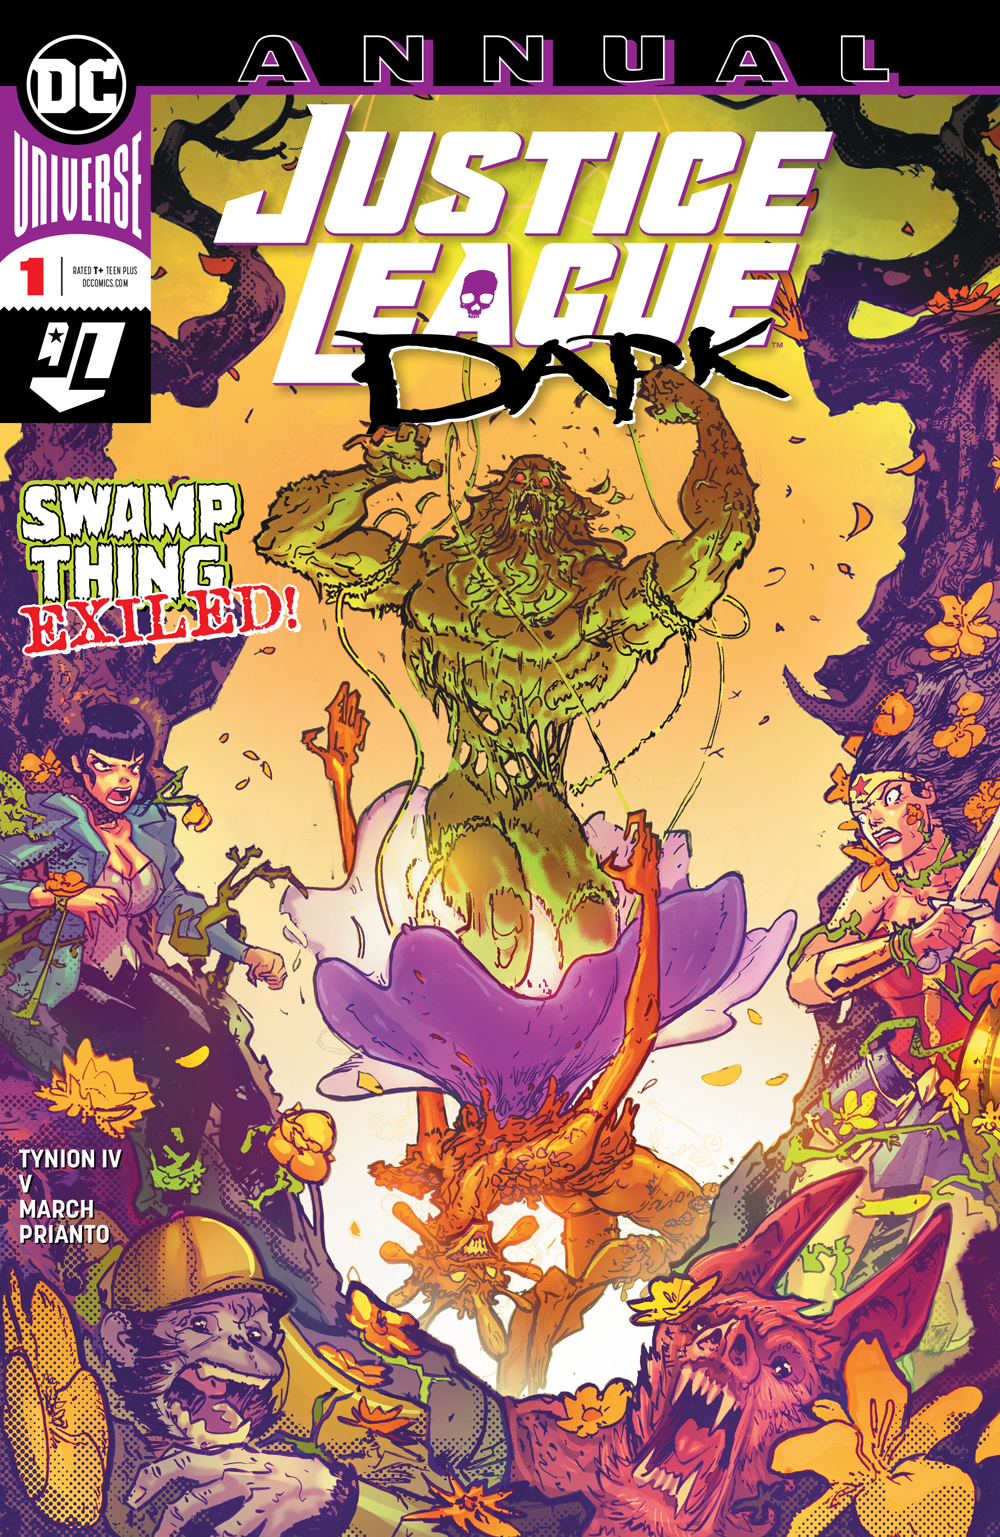 Justice League Dark Annual #1 review